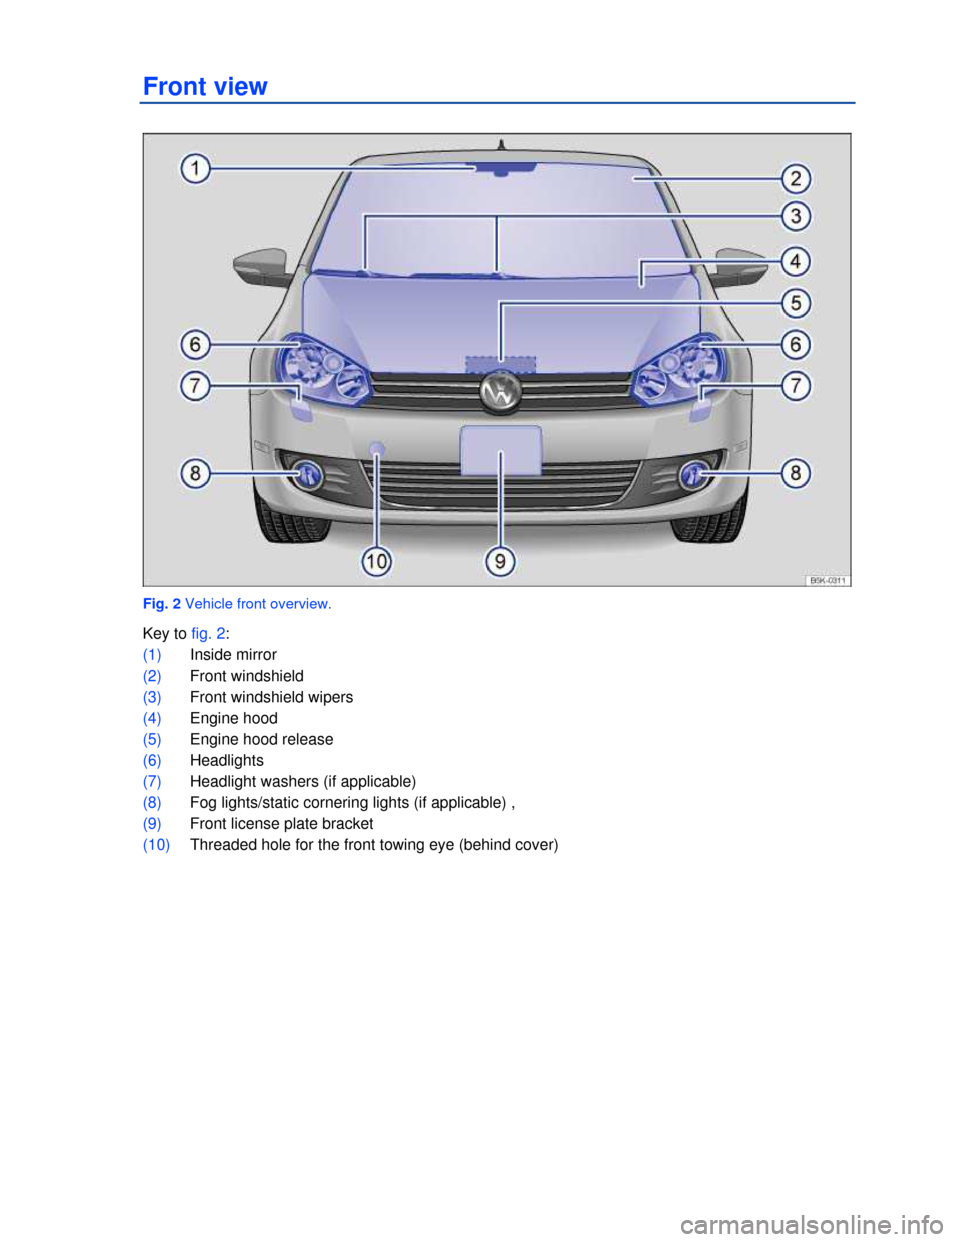 VOLKSWAGEN GOLF 2013 5G / 7.G Owners Manual  
 
Front view 
 
Fig. 2 Vehicle front overview. 
Key to fig. 2: 
(1) Inside mirror  
(2) Front windshield 
(3) Front windshield wipers  
(4) Engine hood  
(5) Engine hood release  
(6) Headlights  
(